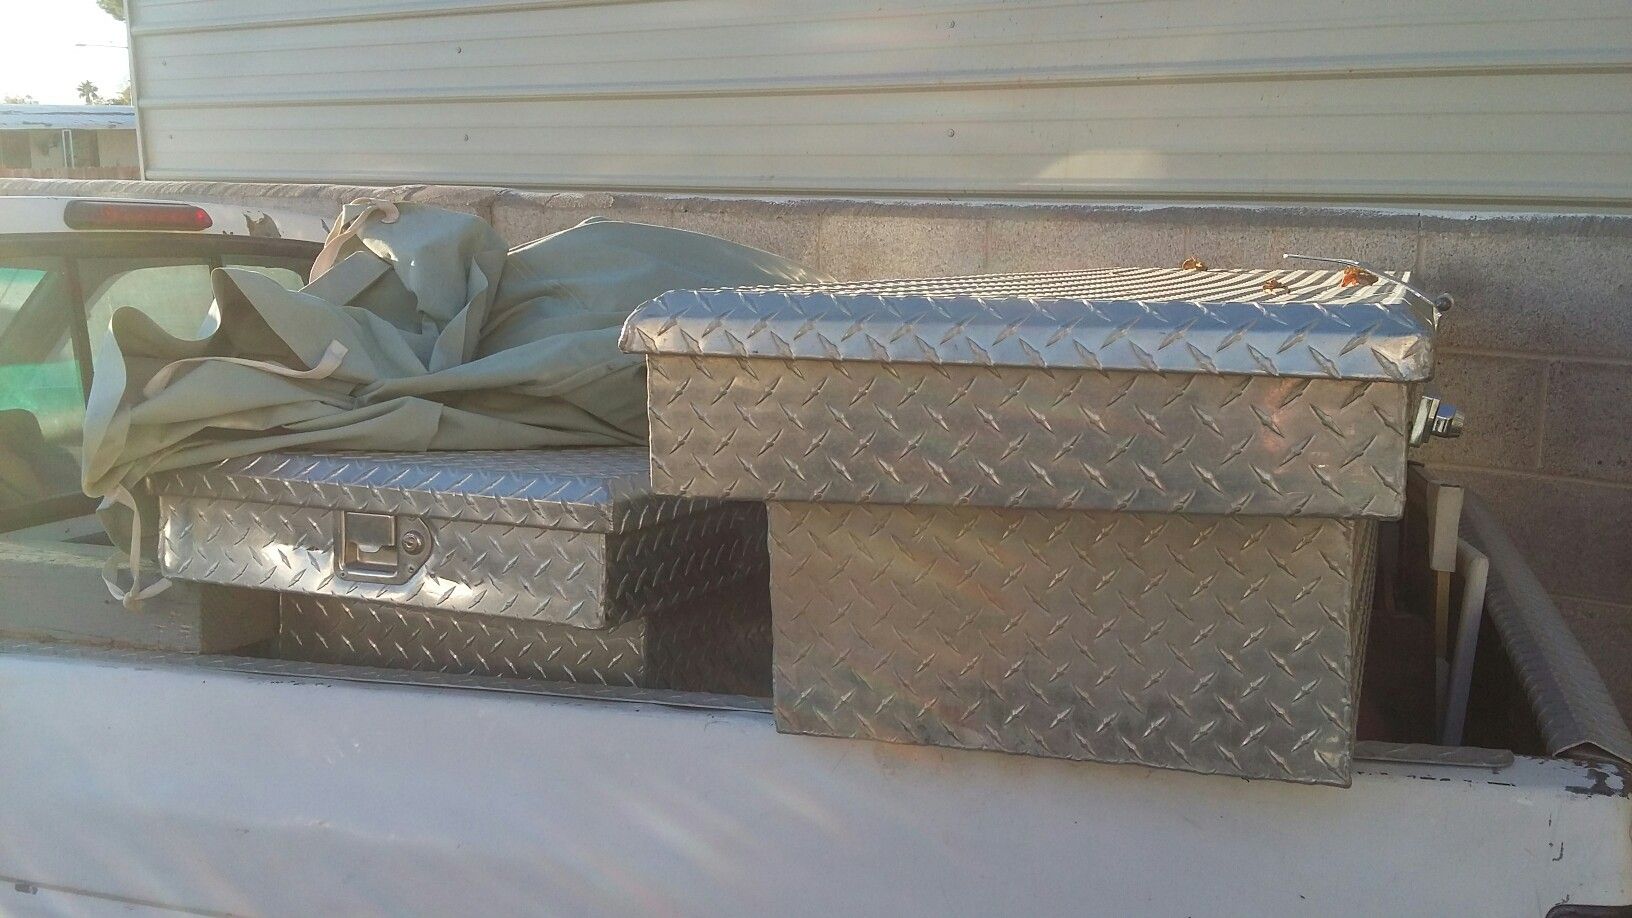 Diamond plate tool boxes one of them fits full-size trucks and the other one it's smaller trucks like S10 or Ford Ranger